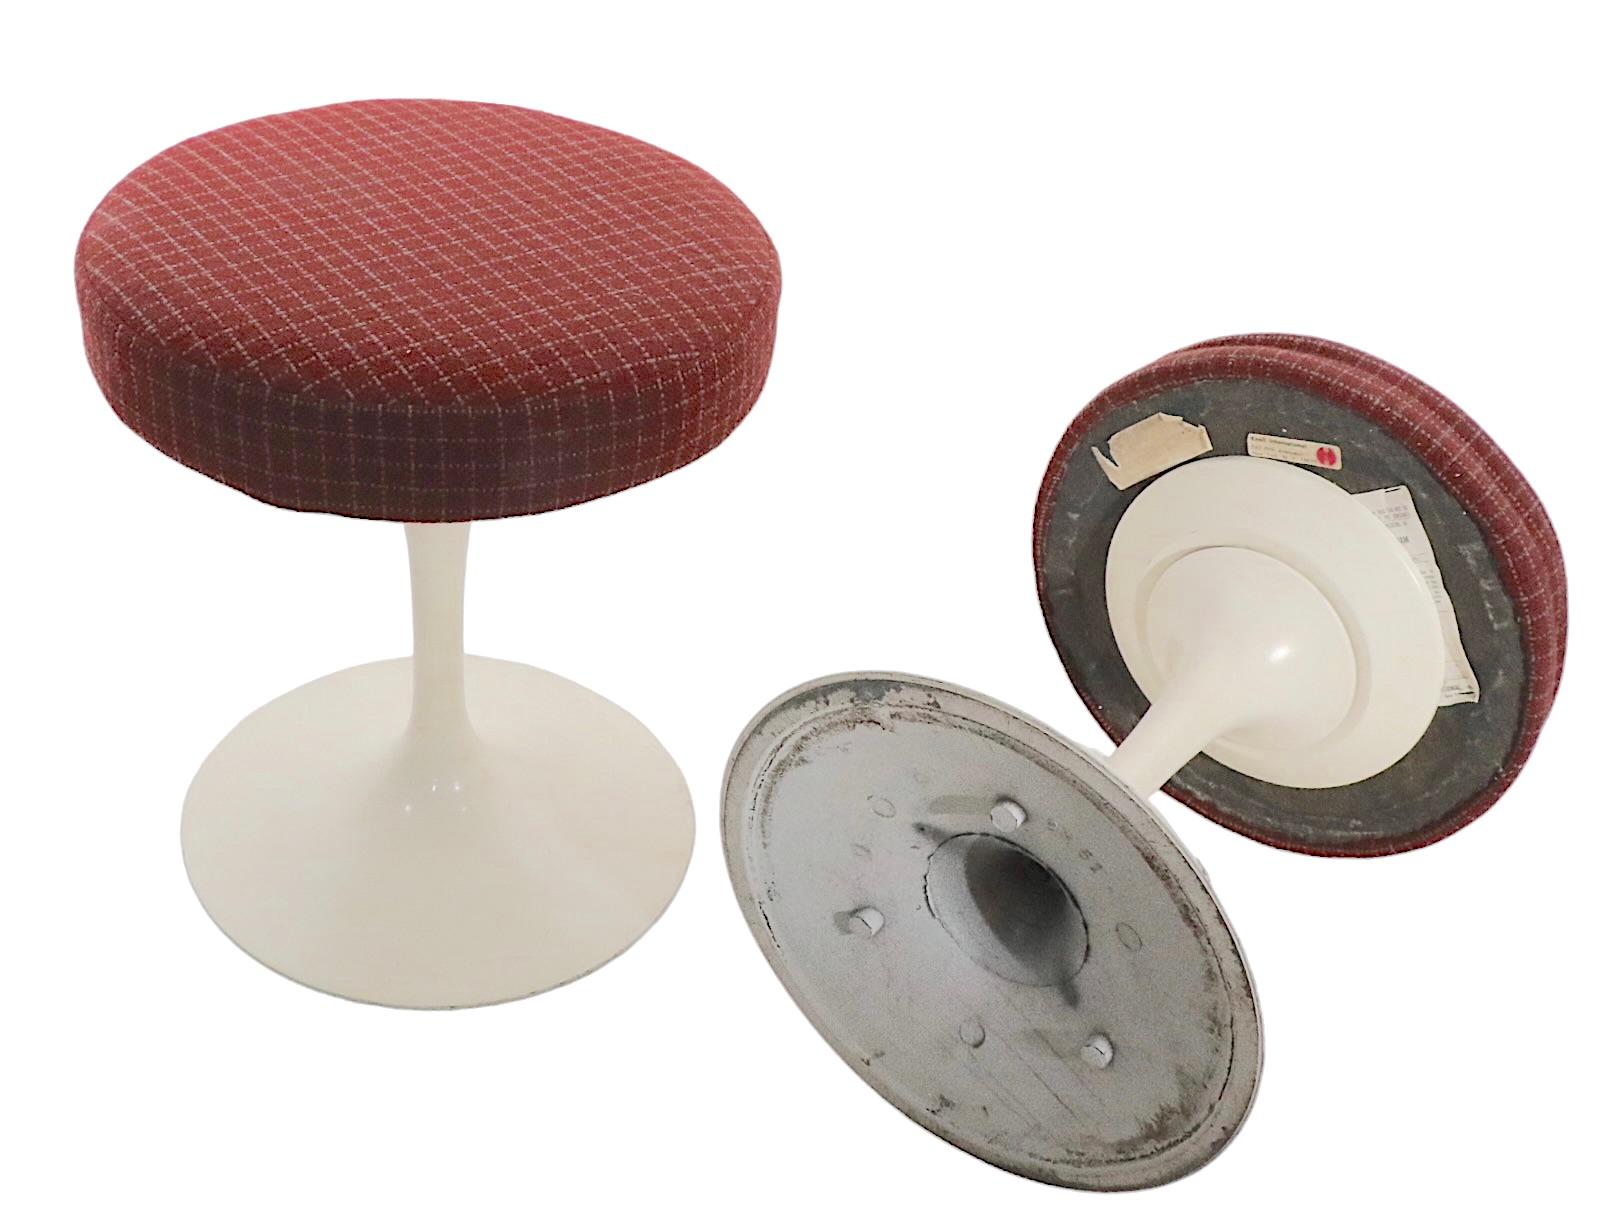 Classic Tulip stools, designed by Eero Saarinen for Knoll. These iconic stools are in good, original condition, the upholstered tops show some wear, they are usable as is, or we offer custom upholstery if you prefer a more polished look. Both retain